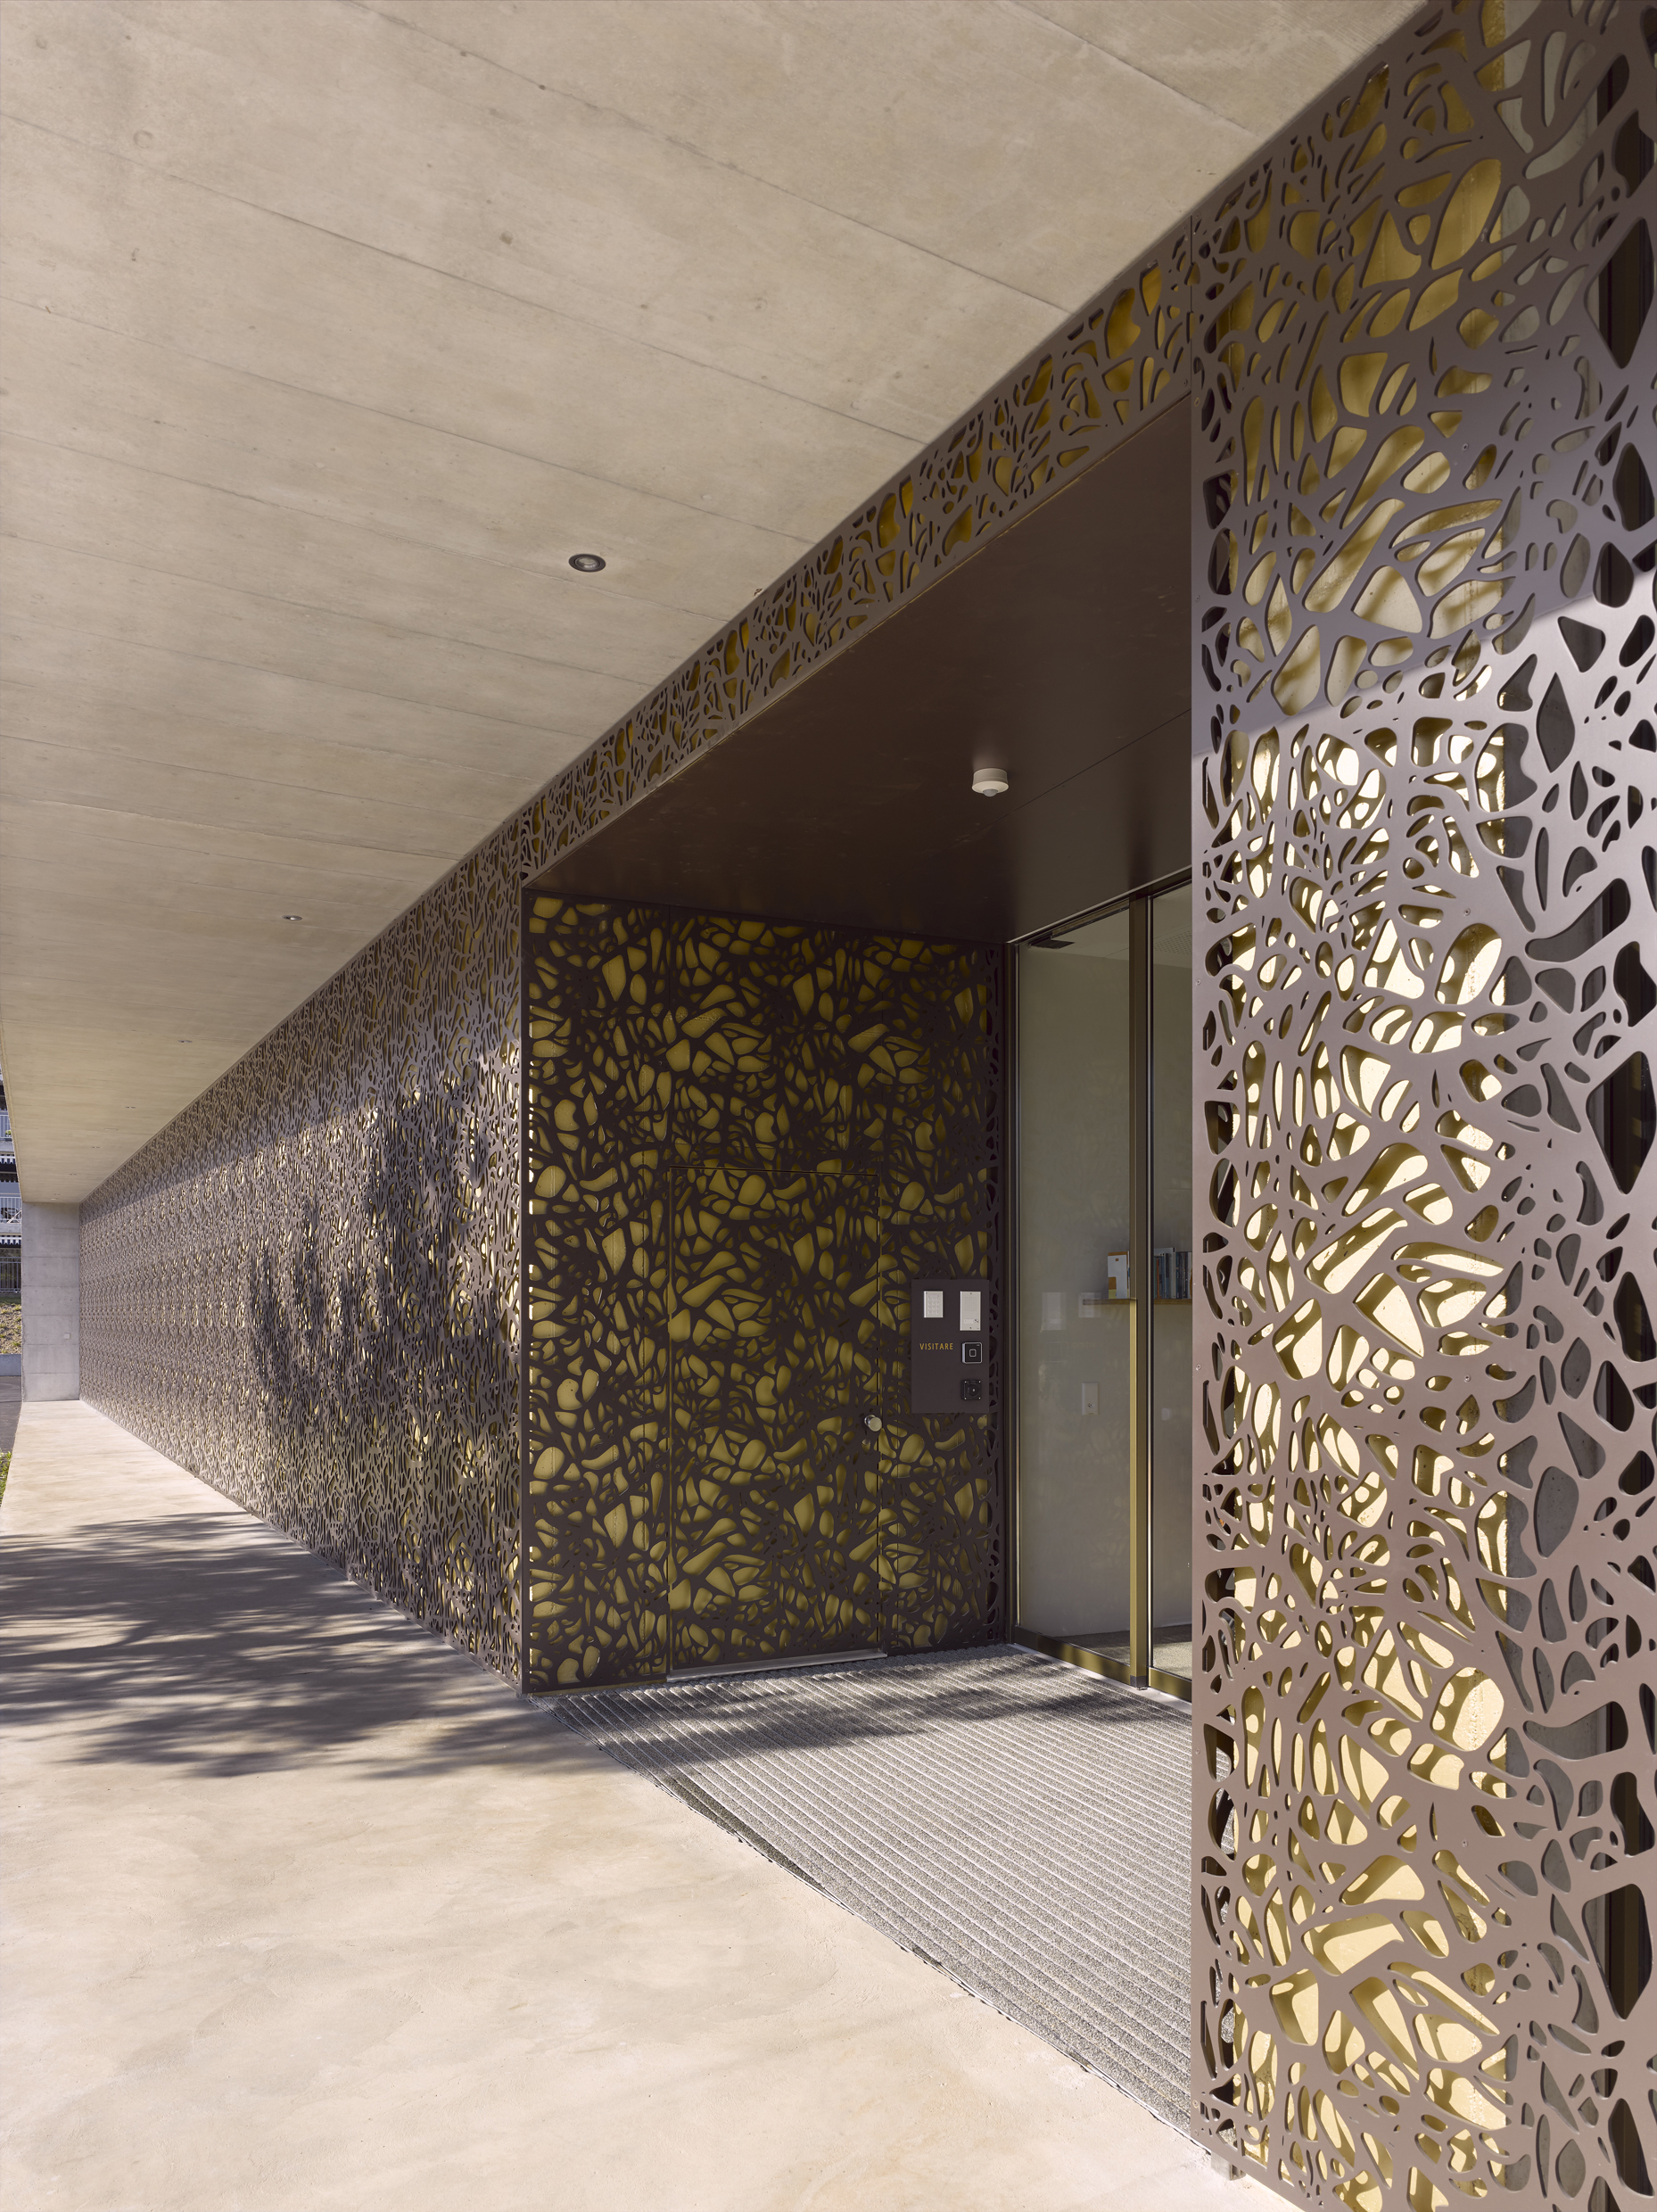 facade perforated cladding cellon appearance solothurn concrete overcomes delicate heavy bruag perforation messer photographer 8mm